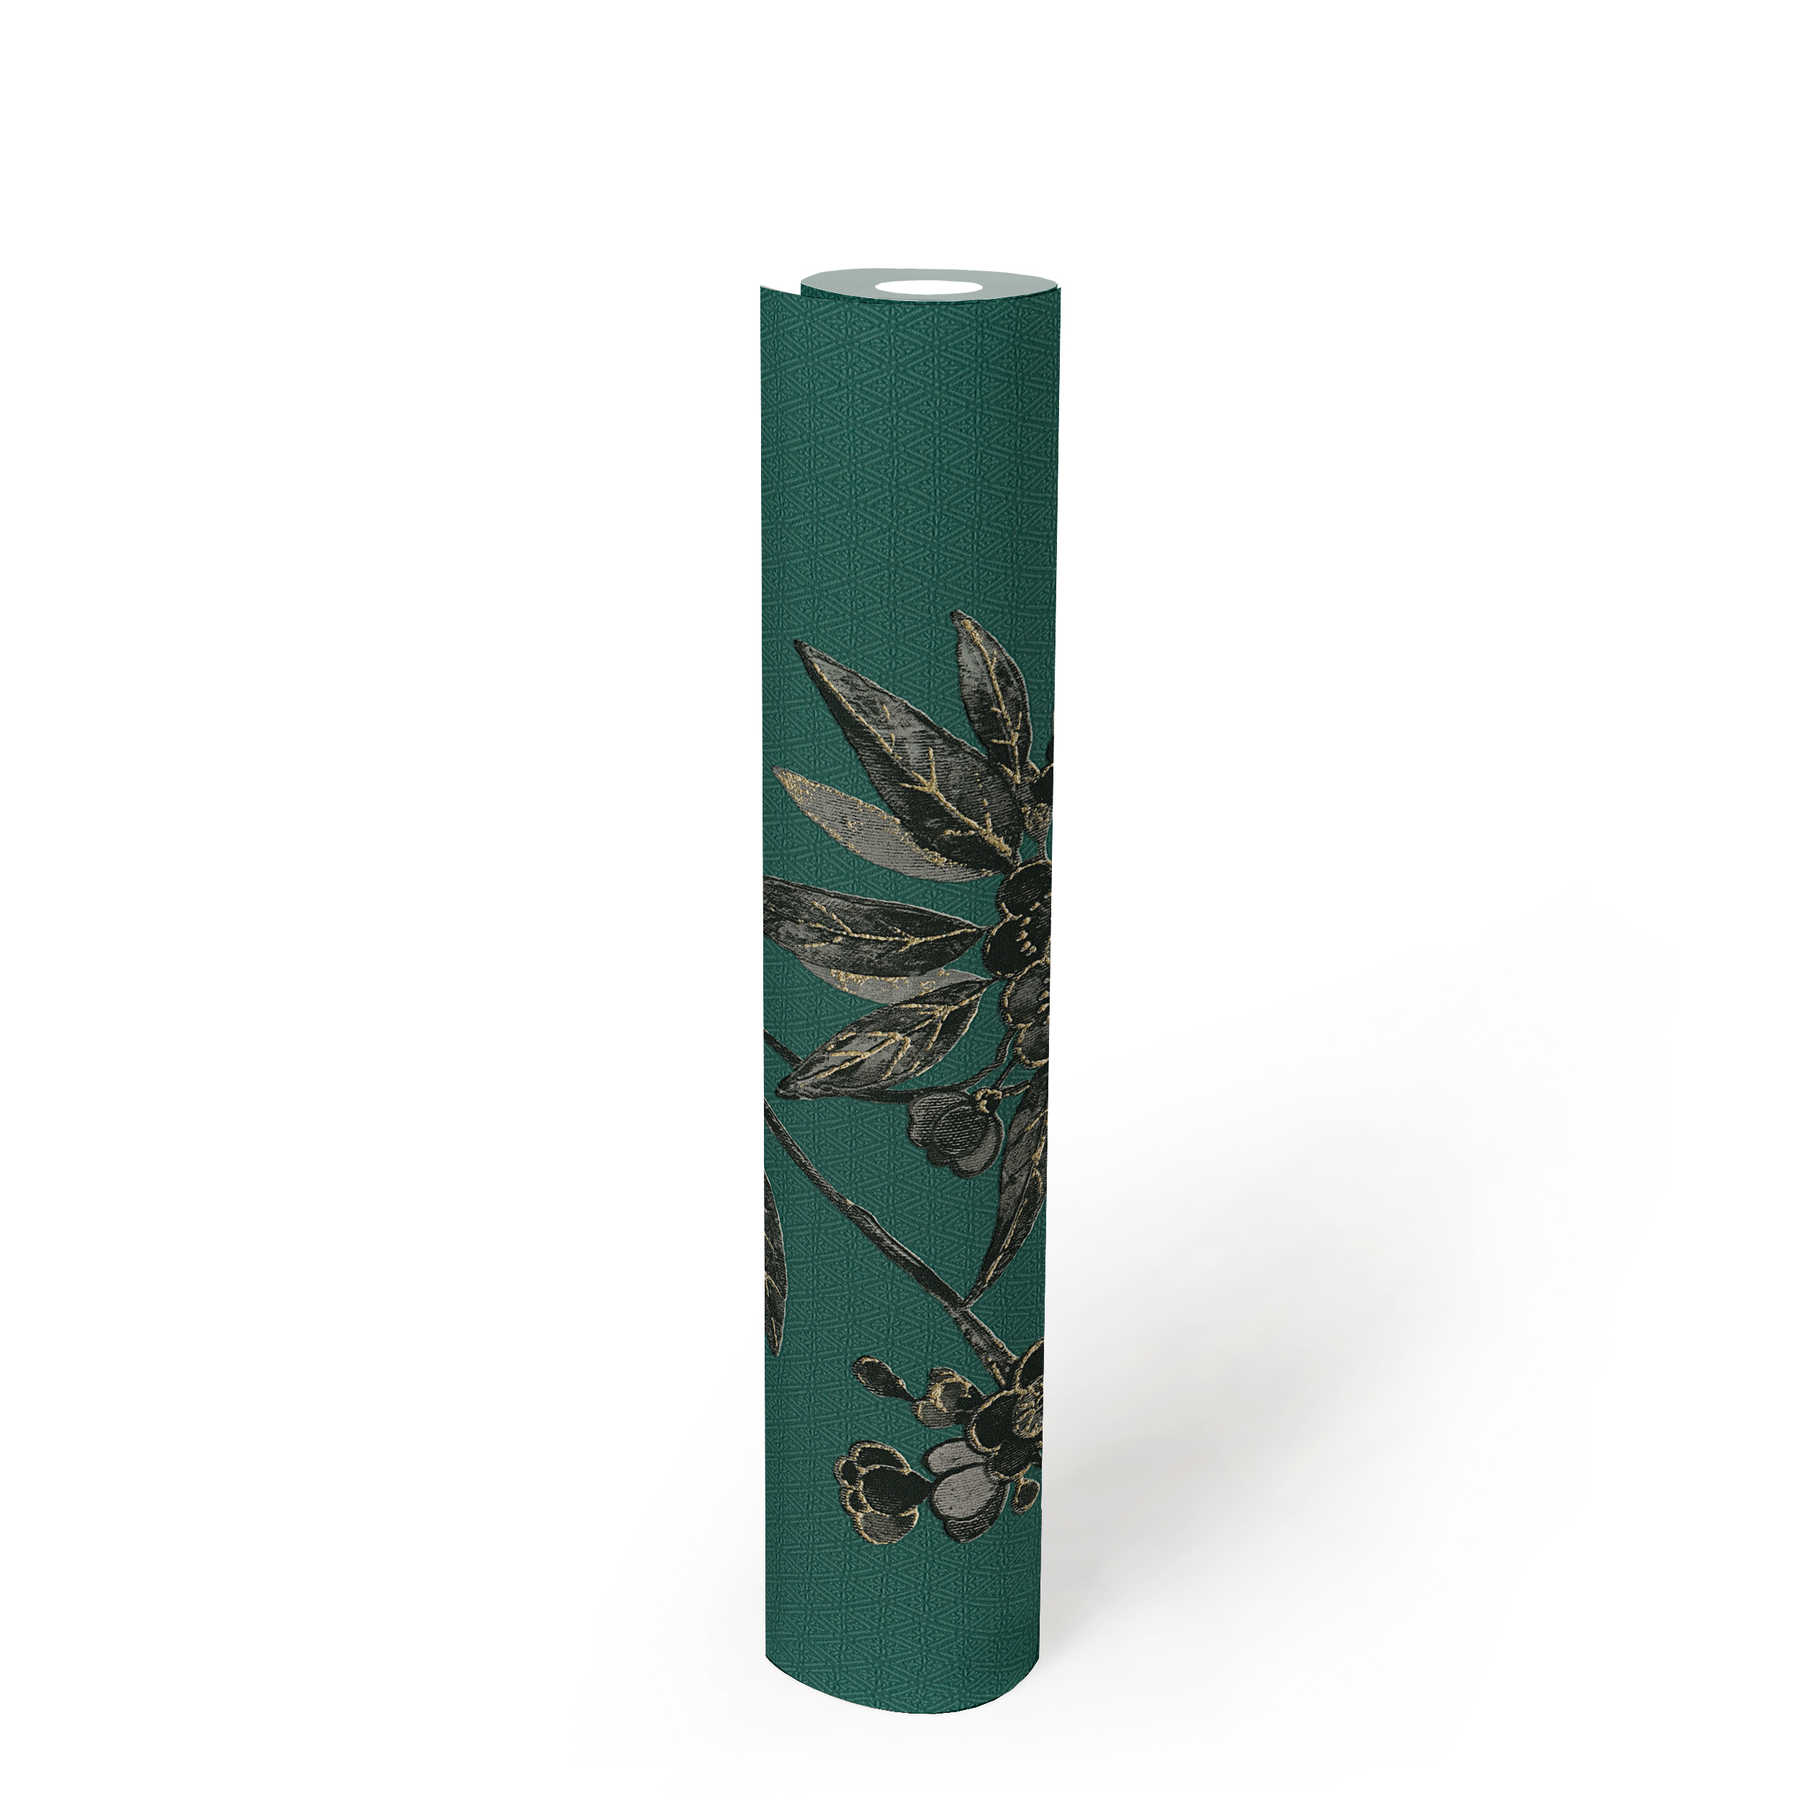             Floral wallpaper with flower tendrils in Asian style - green, black, grey
        